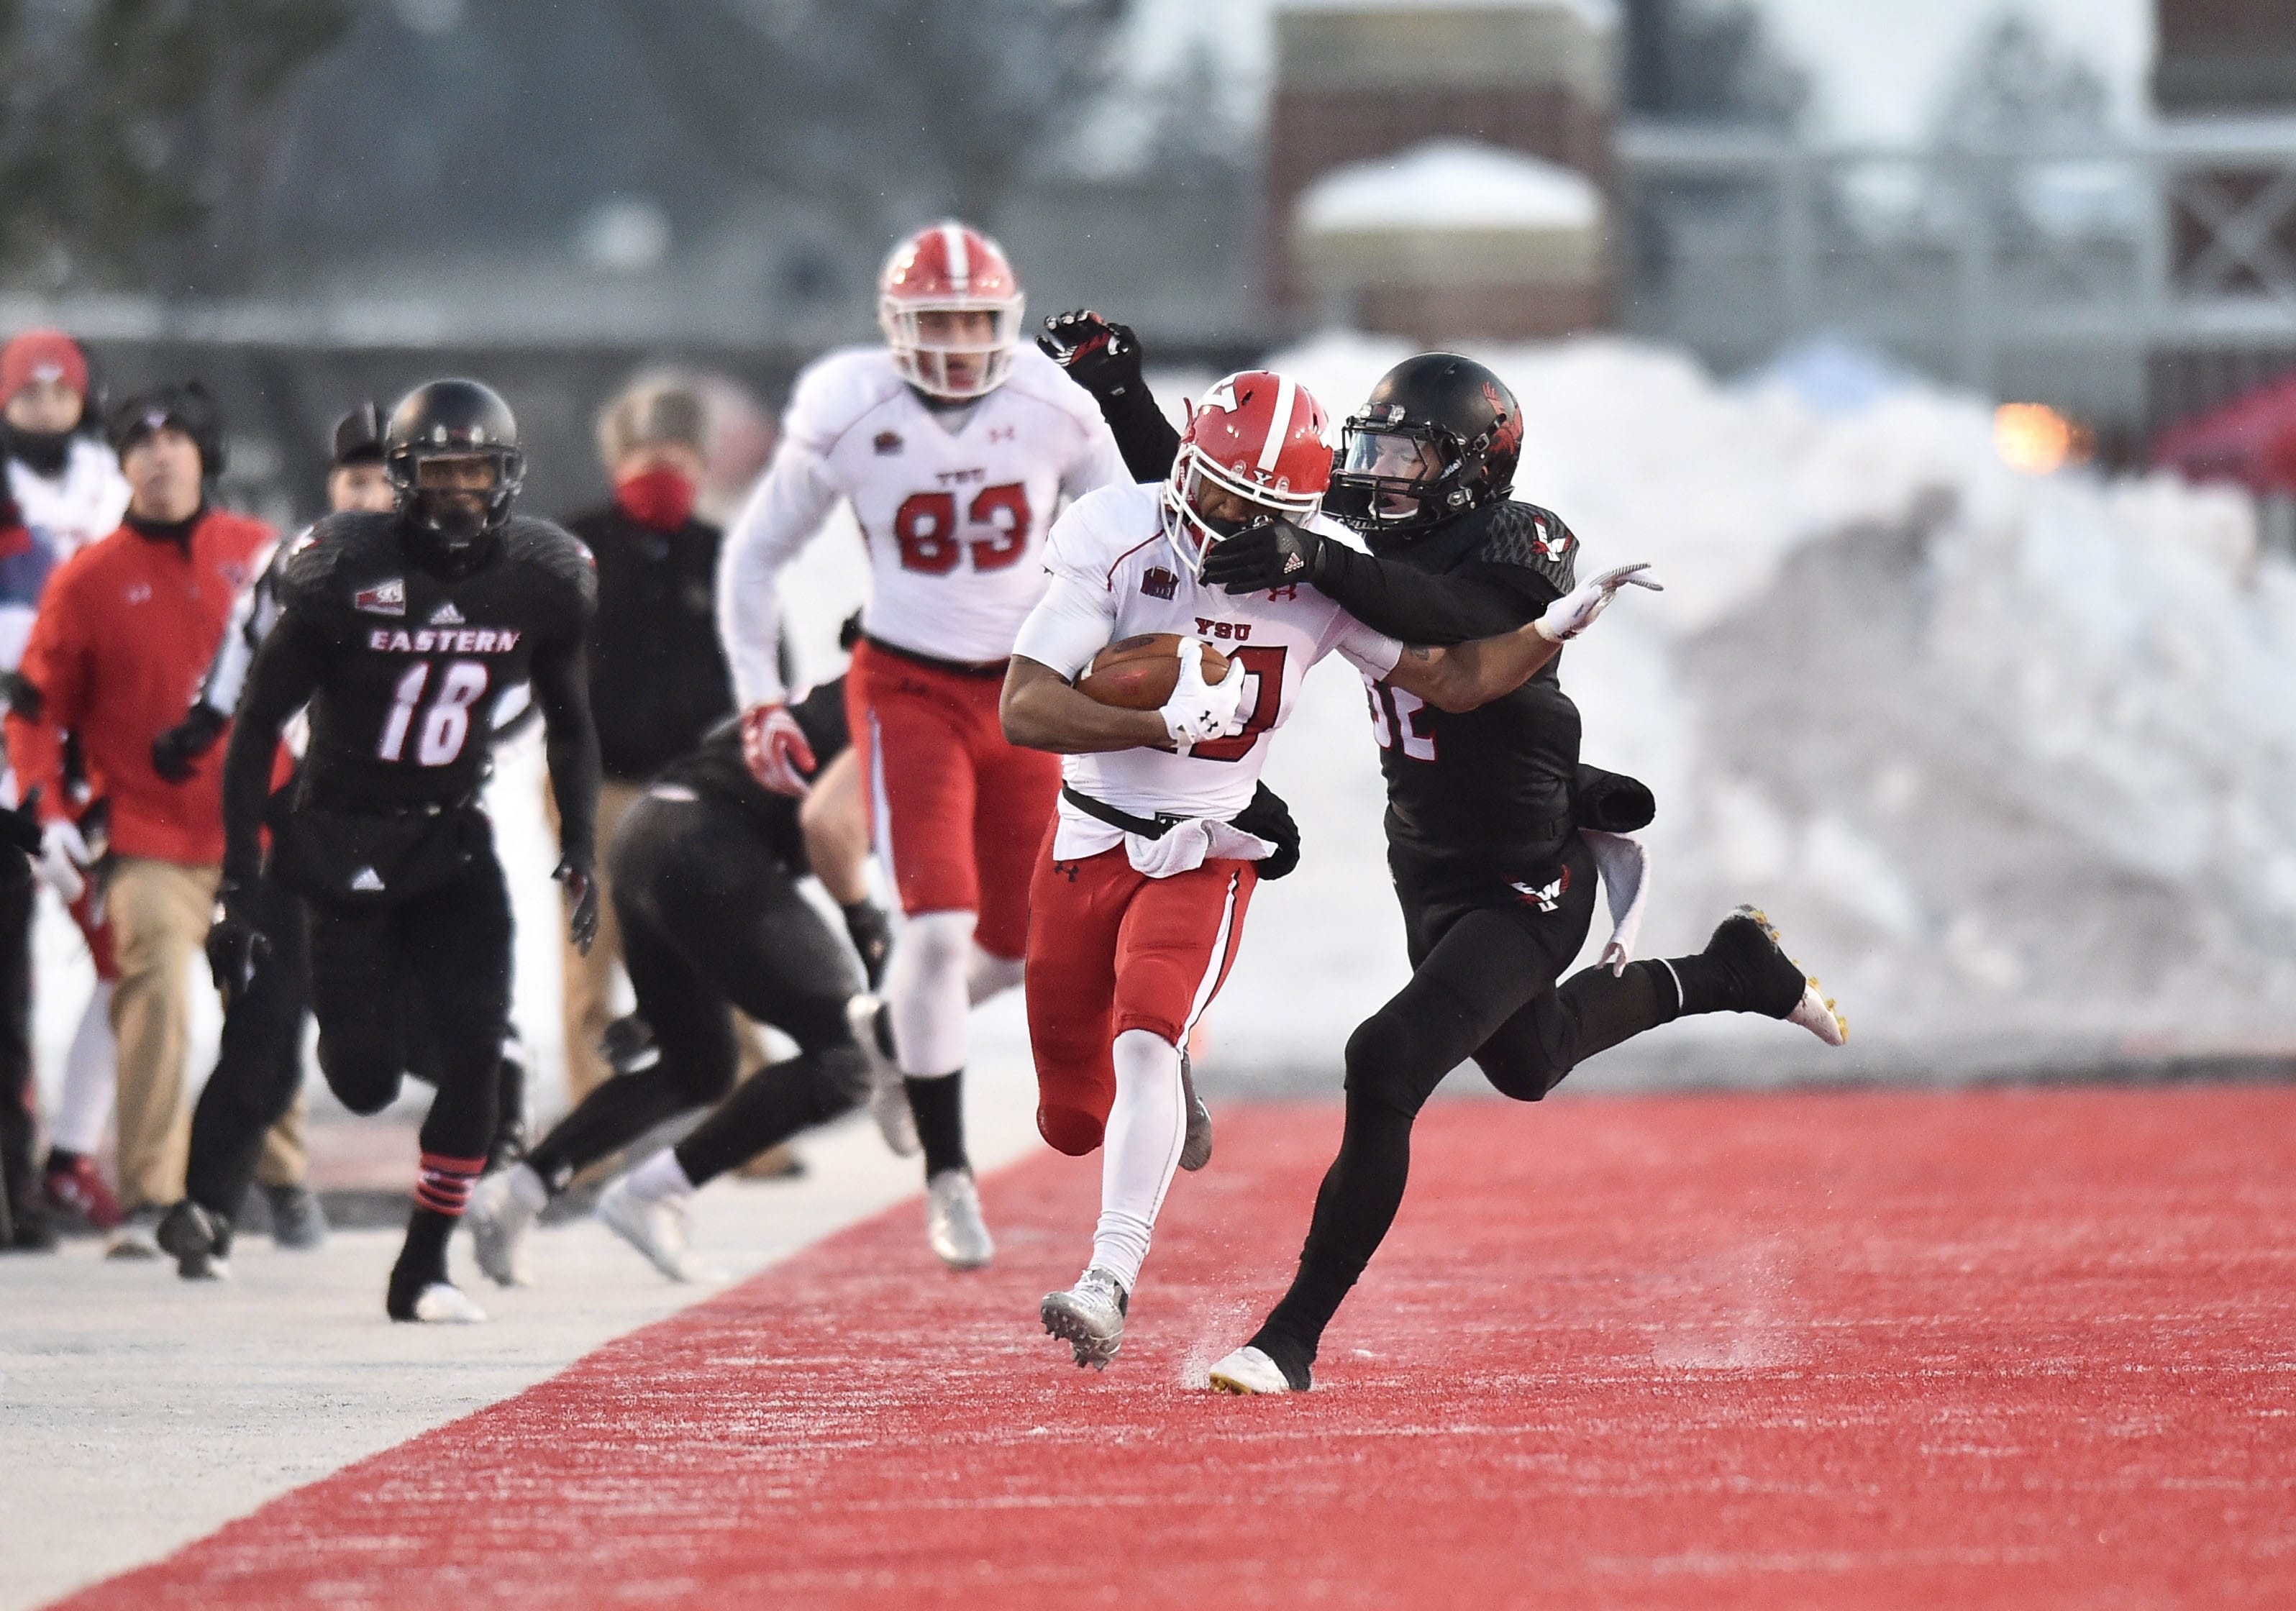 Youngstown State running back Jody Webb (20) runs the ball against Eastern Washington during the first half of an NCAA college football game on Saturday, Dec. 17, 2016, in Cheney, Wash.